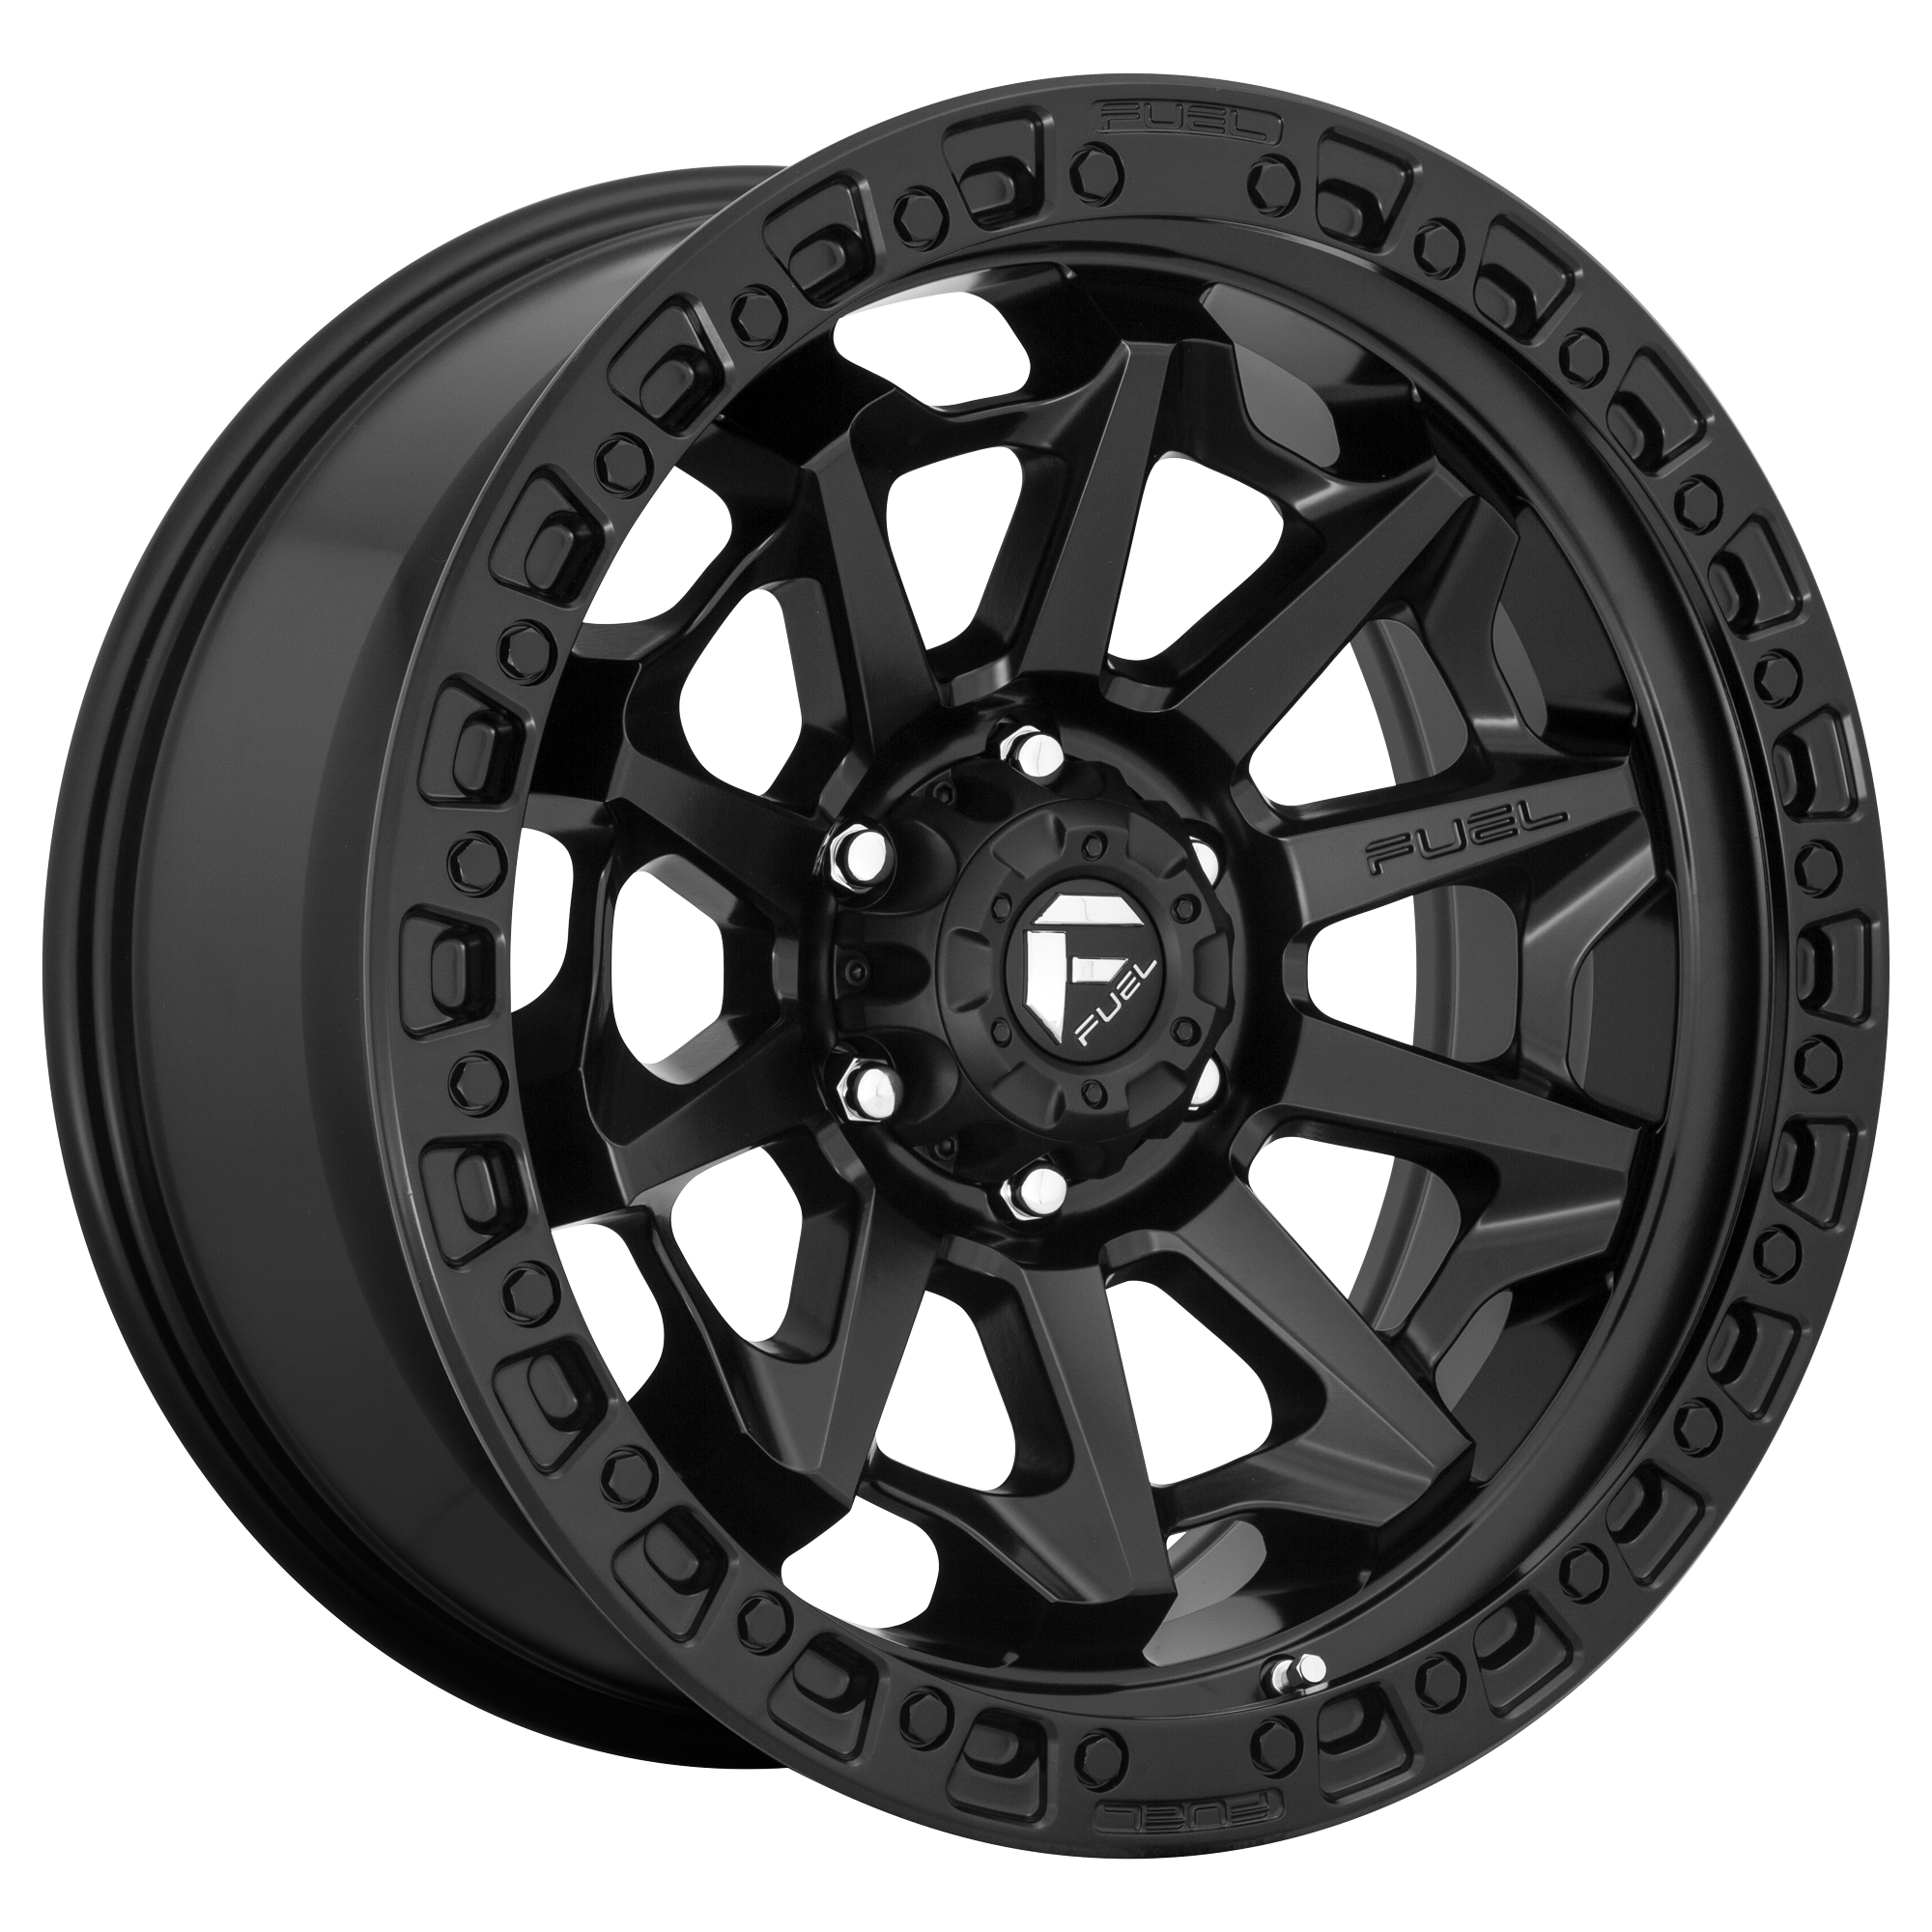 COVERT 17x9 5x127.00 MATTE BLACK (1 mm) - Tires and Engine Performance